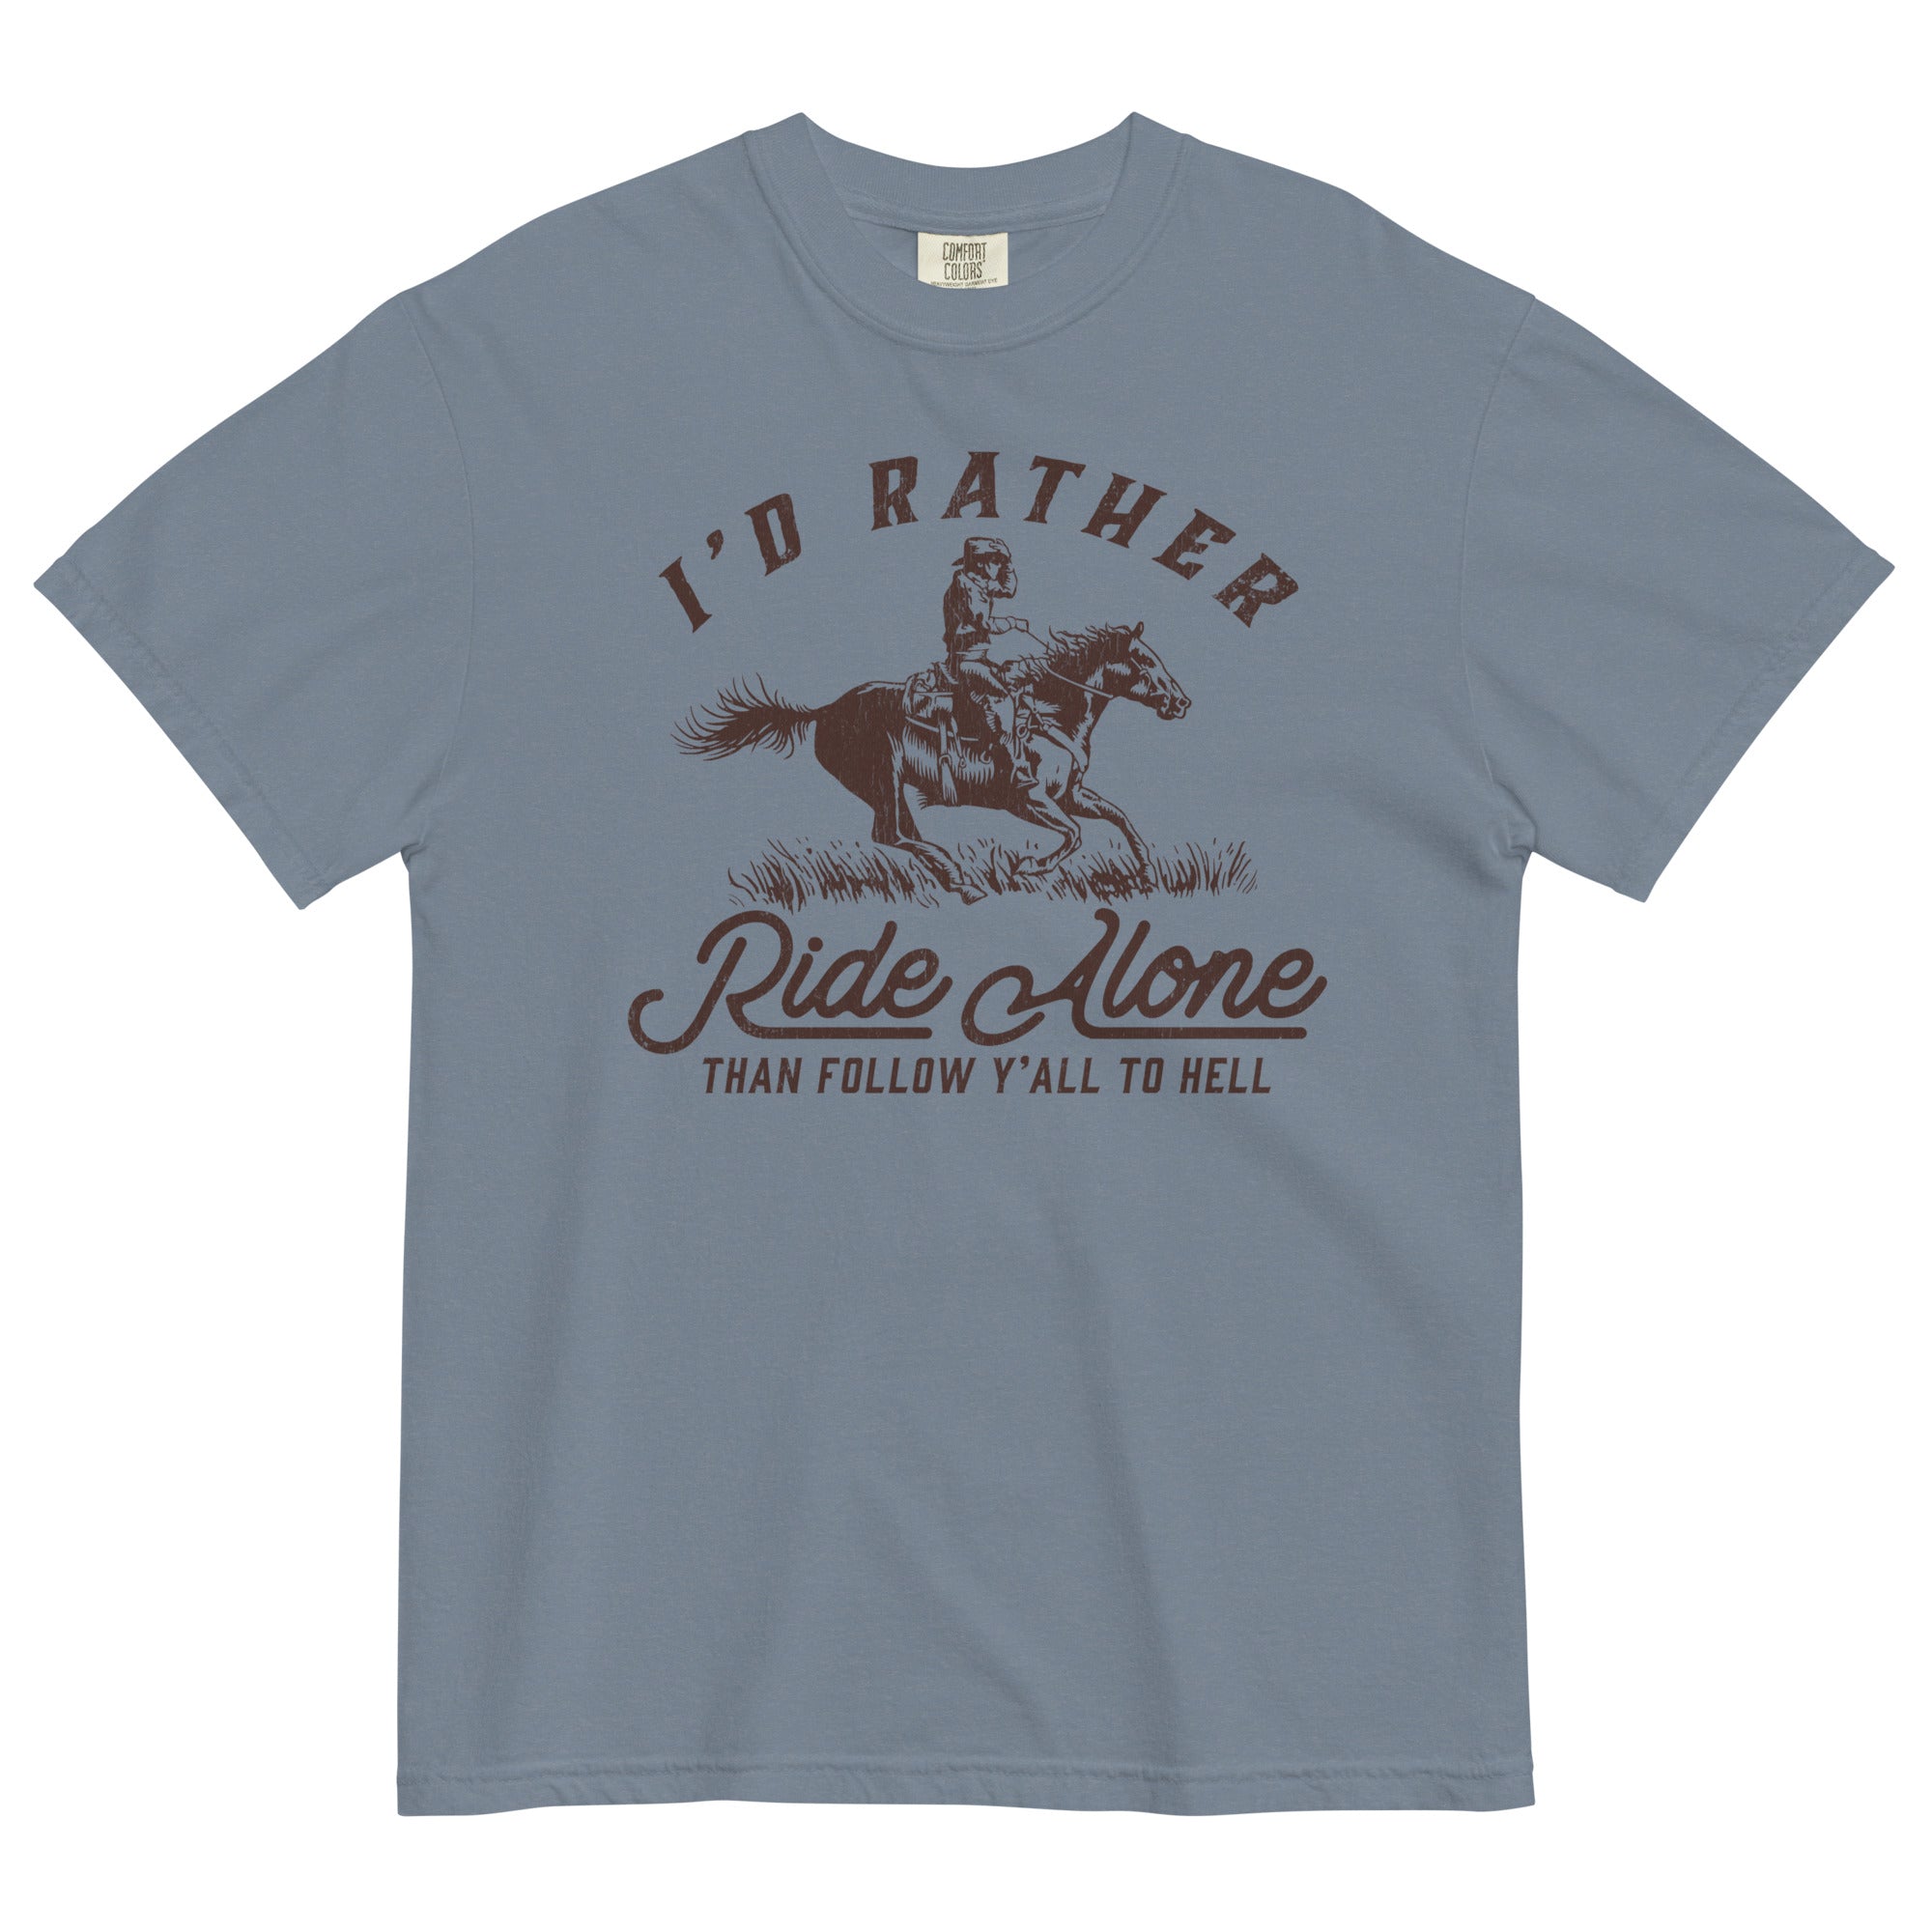 I'd Rather Ride Alone Than Follow Y-All to Hell Garment-Dyed Heavyweight T-shirt